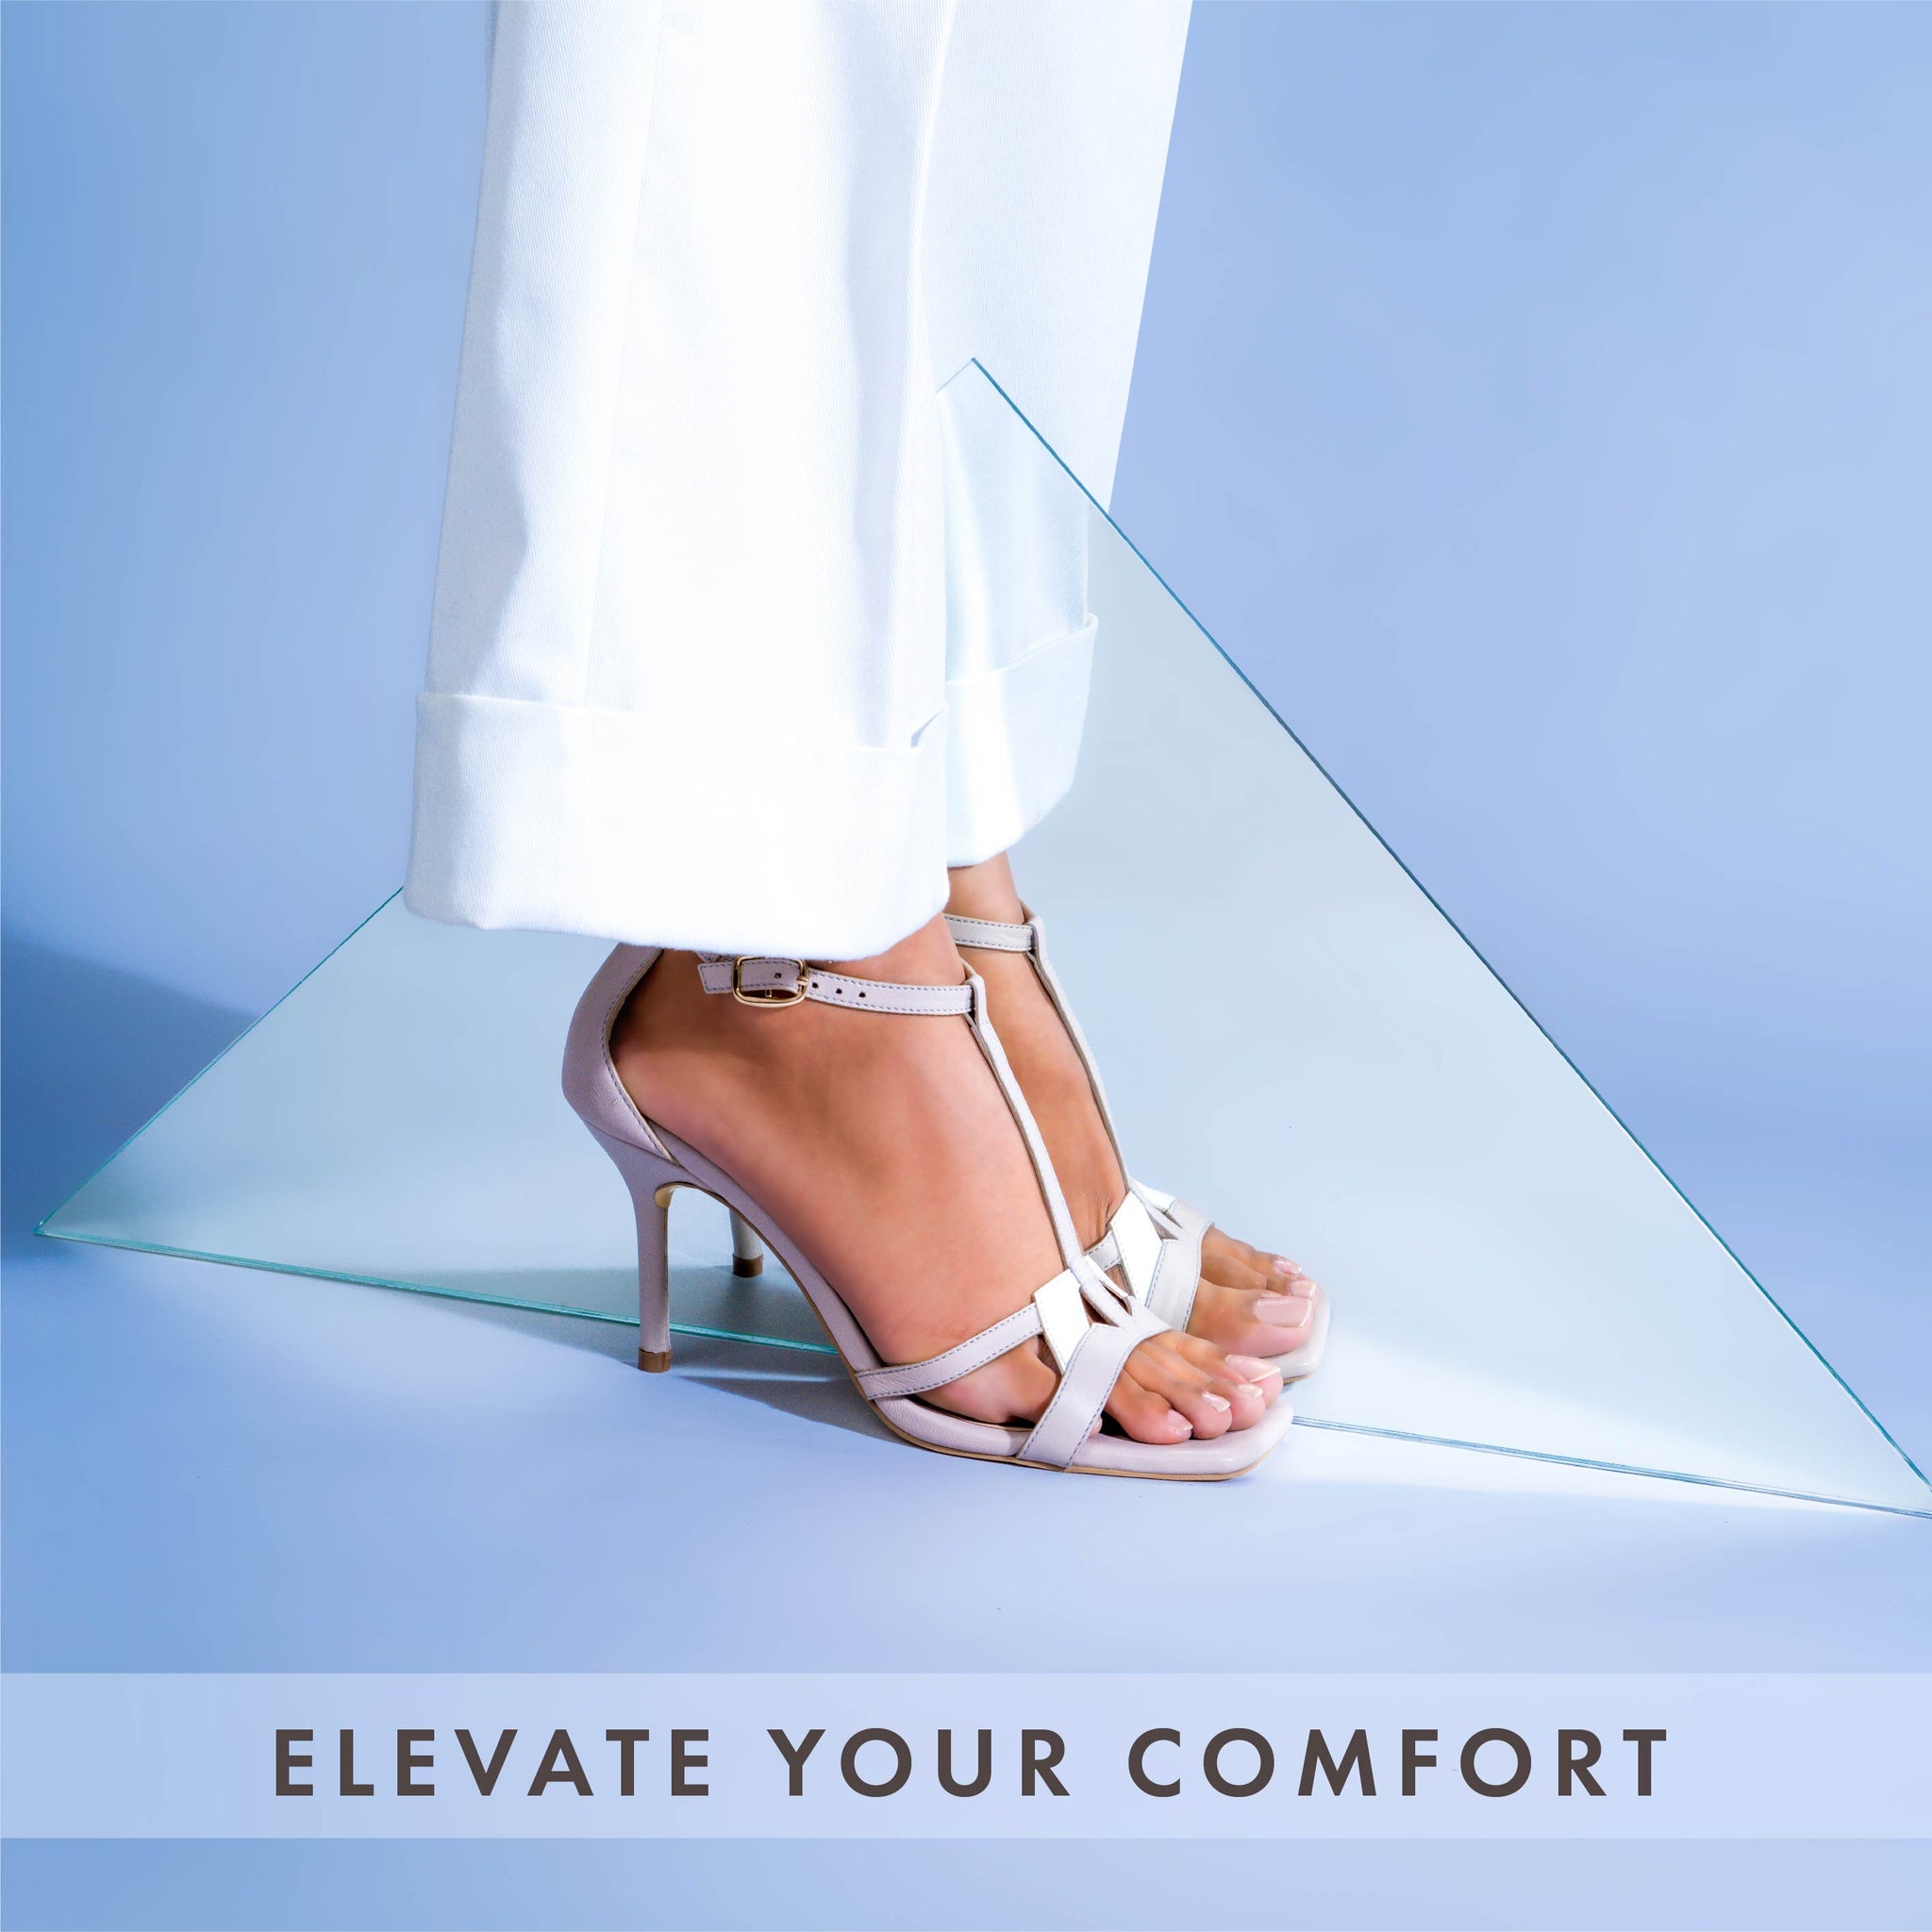 Elevate Your Comfort: A Step-by-Step Guide on How to Make High Heels More Comfortable